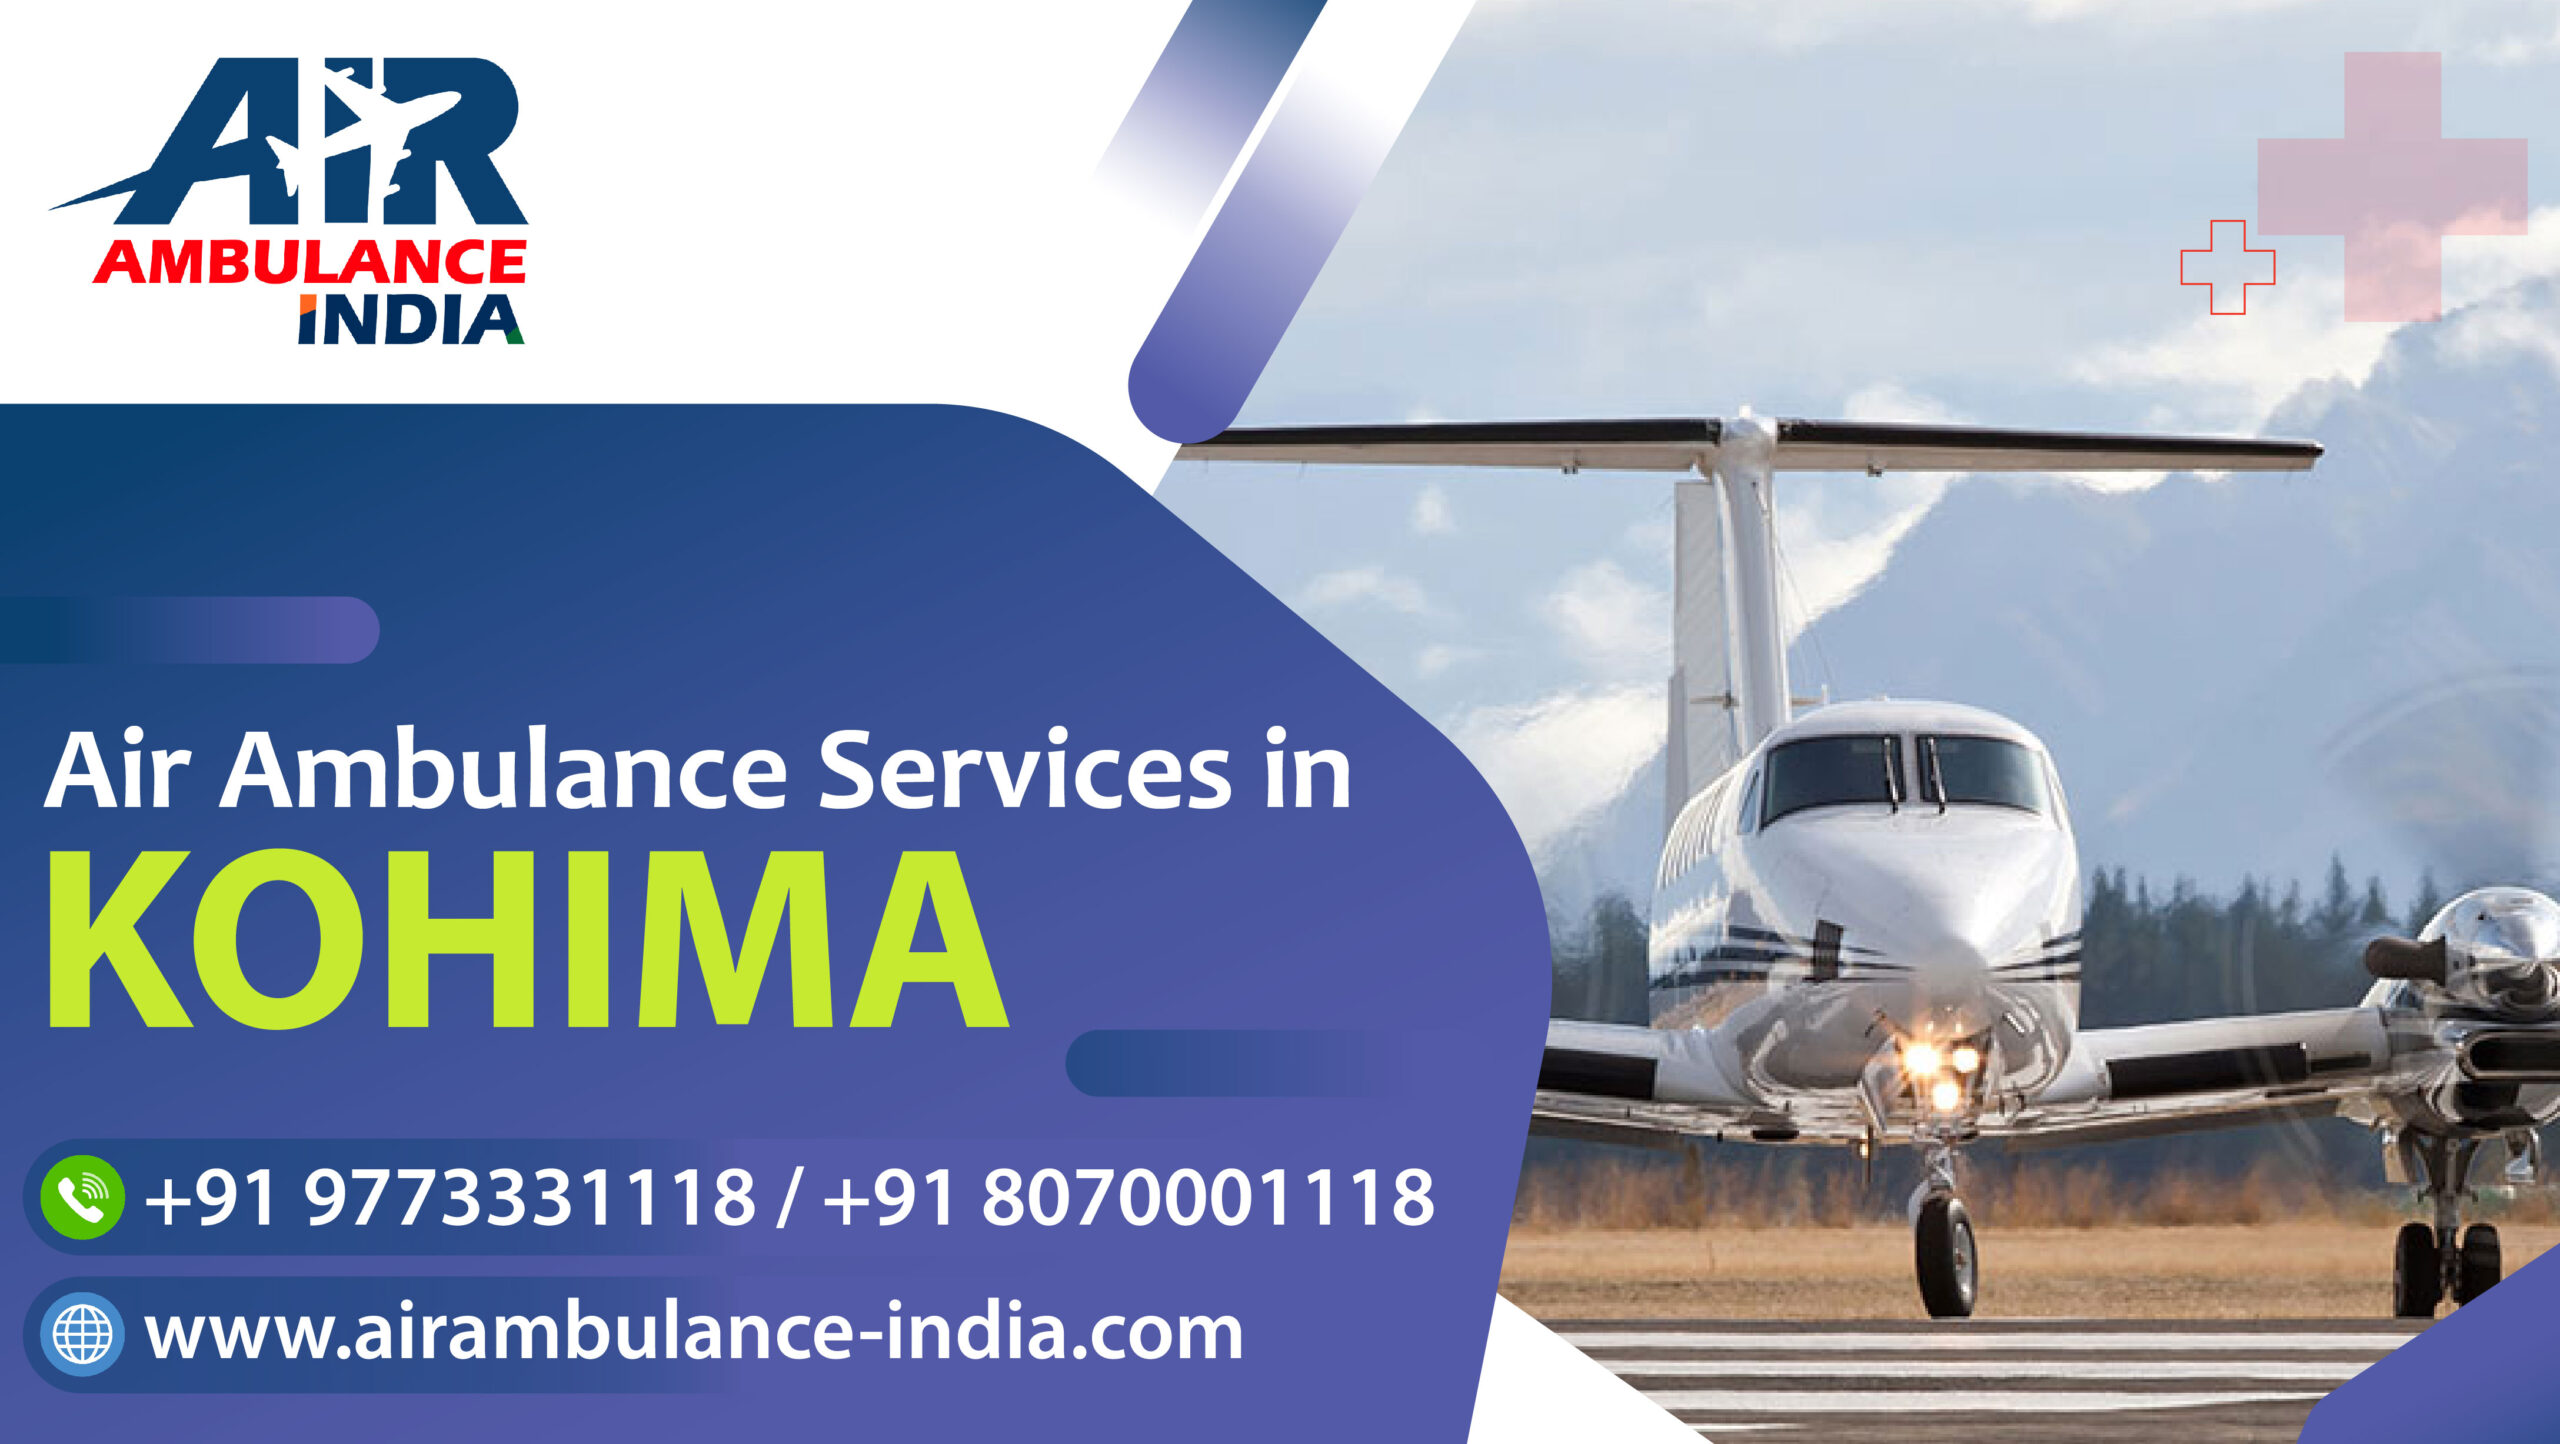 Air Ambulance Services in Kohima